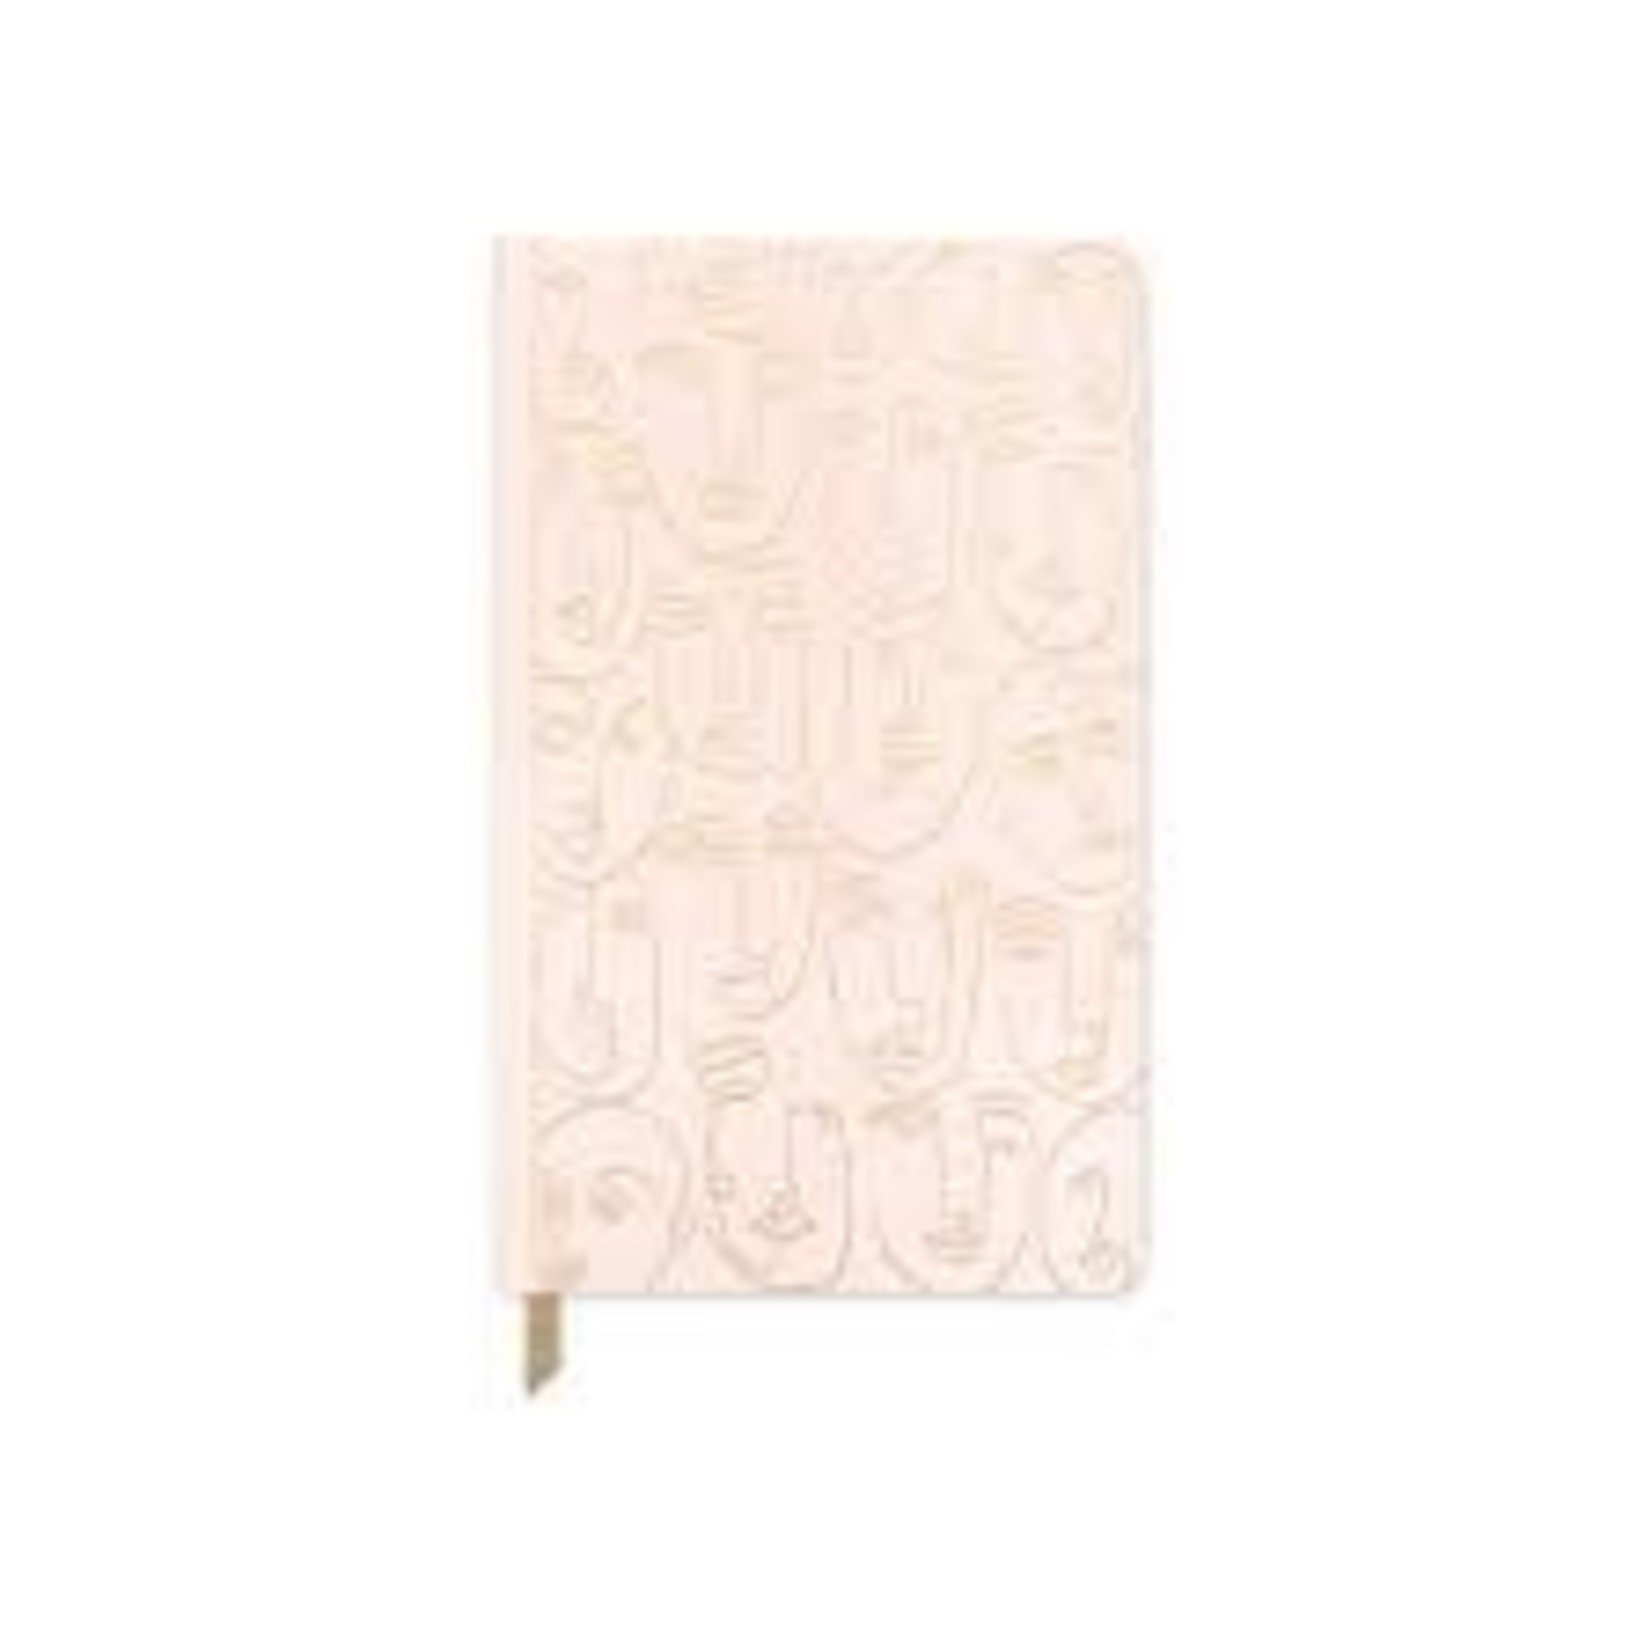 Faces Journal in Blush Pink